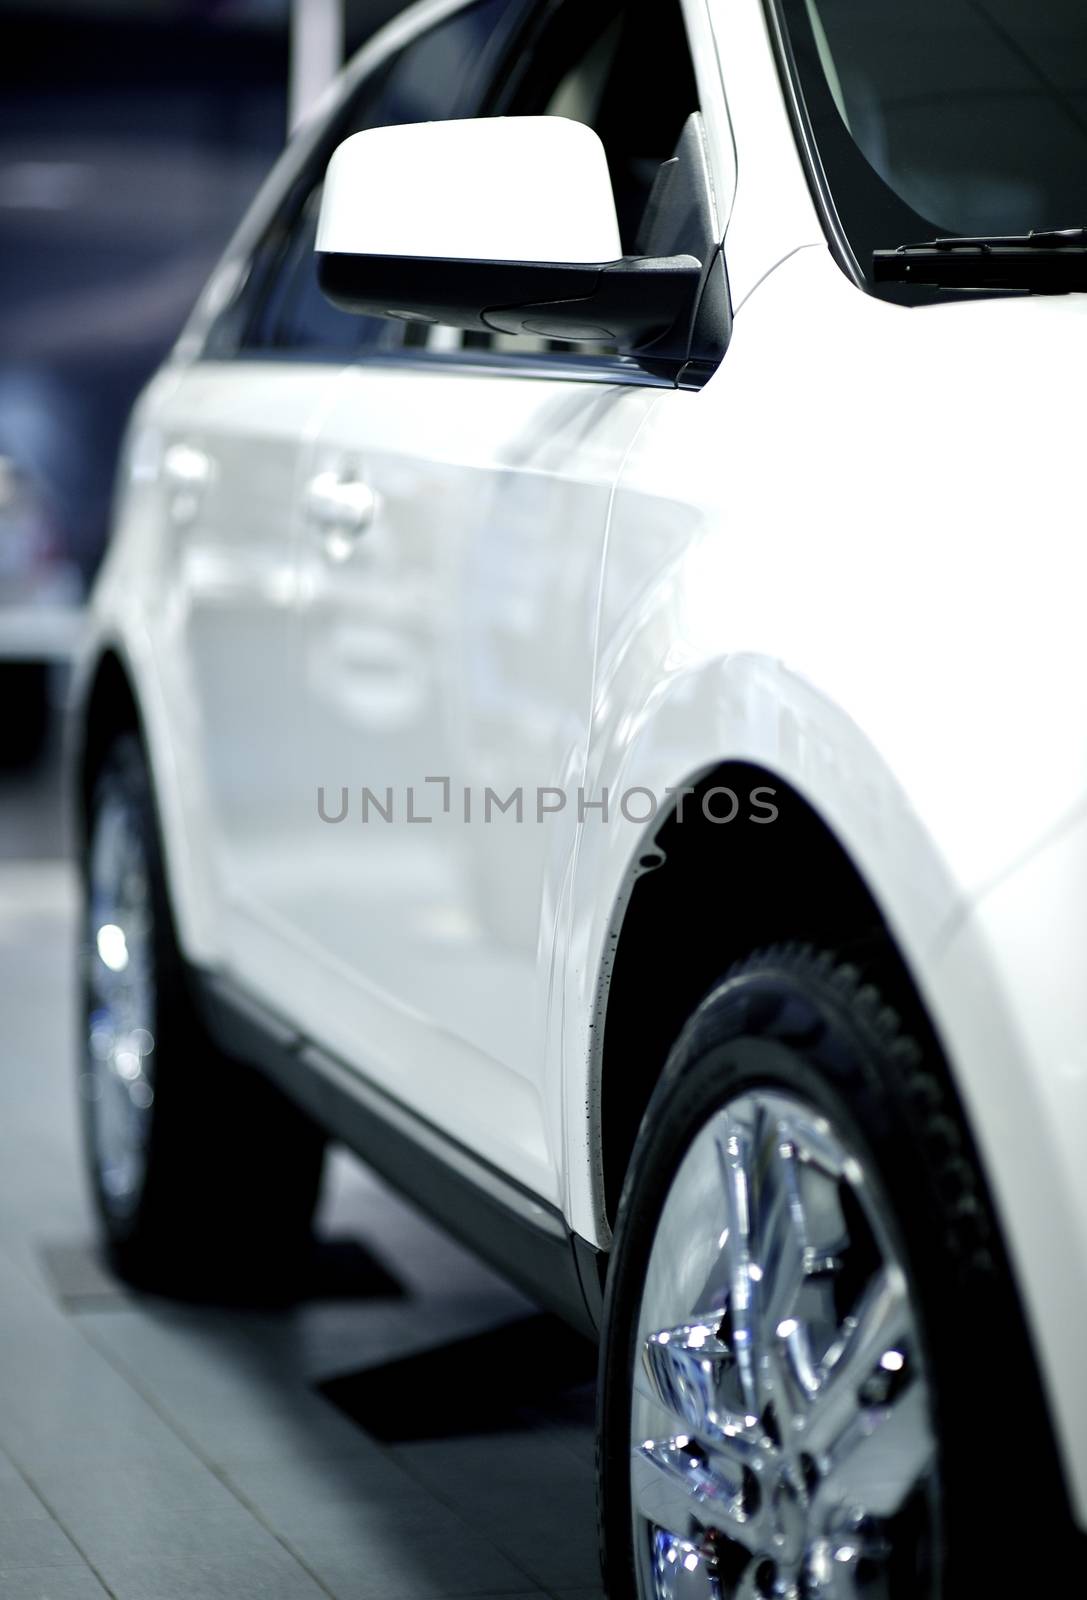 Side of the White Vehicle in Dealer Showroom. White SUV for Sale. Vertical Photo